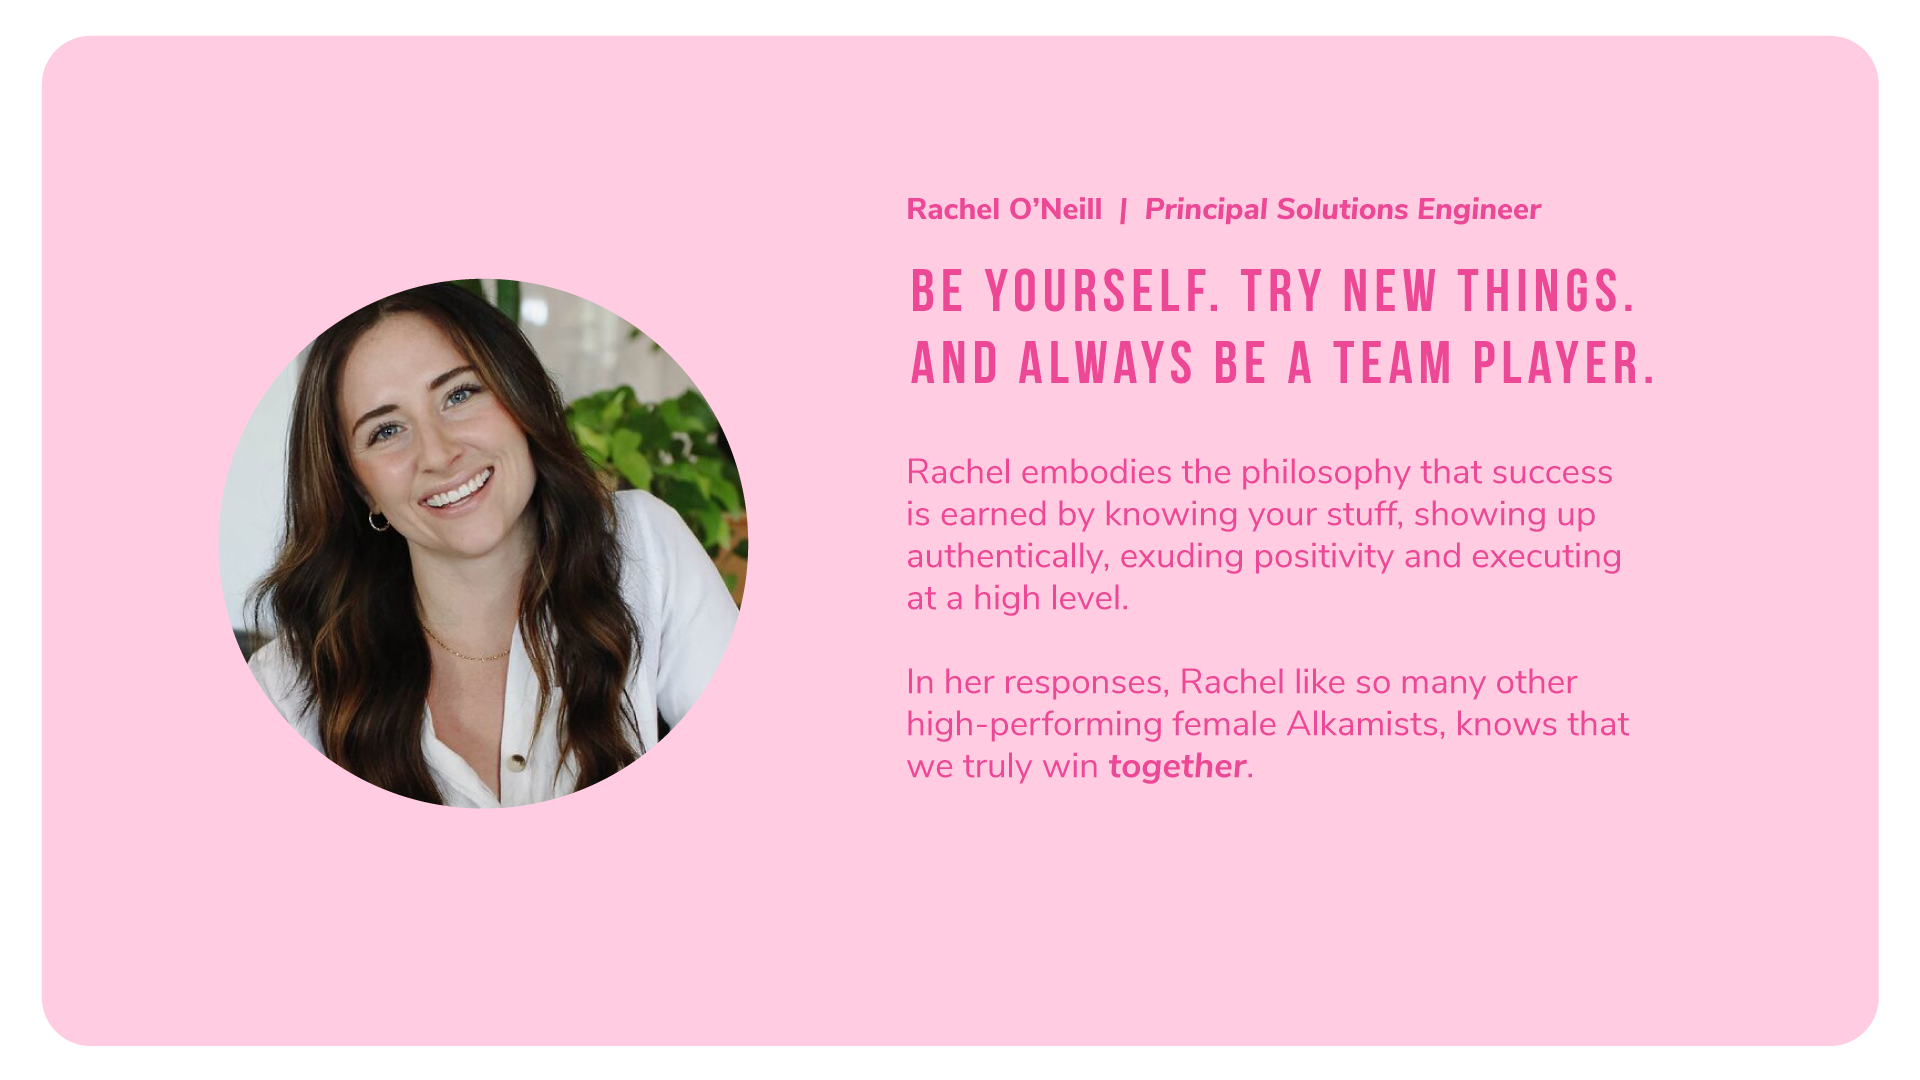 Rachel O'Neill of Alkami says: Be yourself. Try new things. And always be a team player